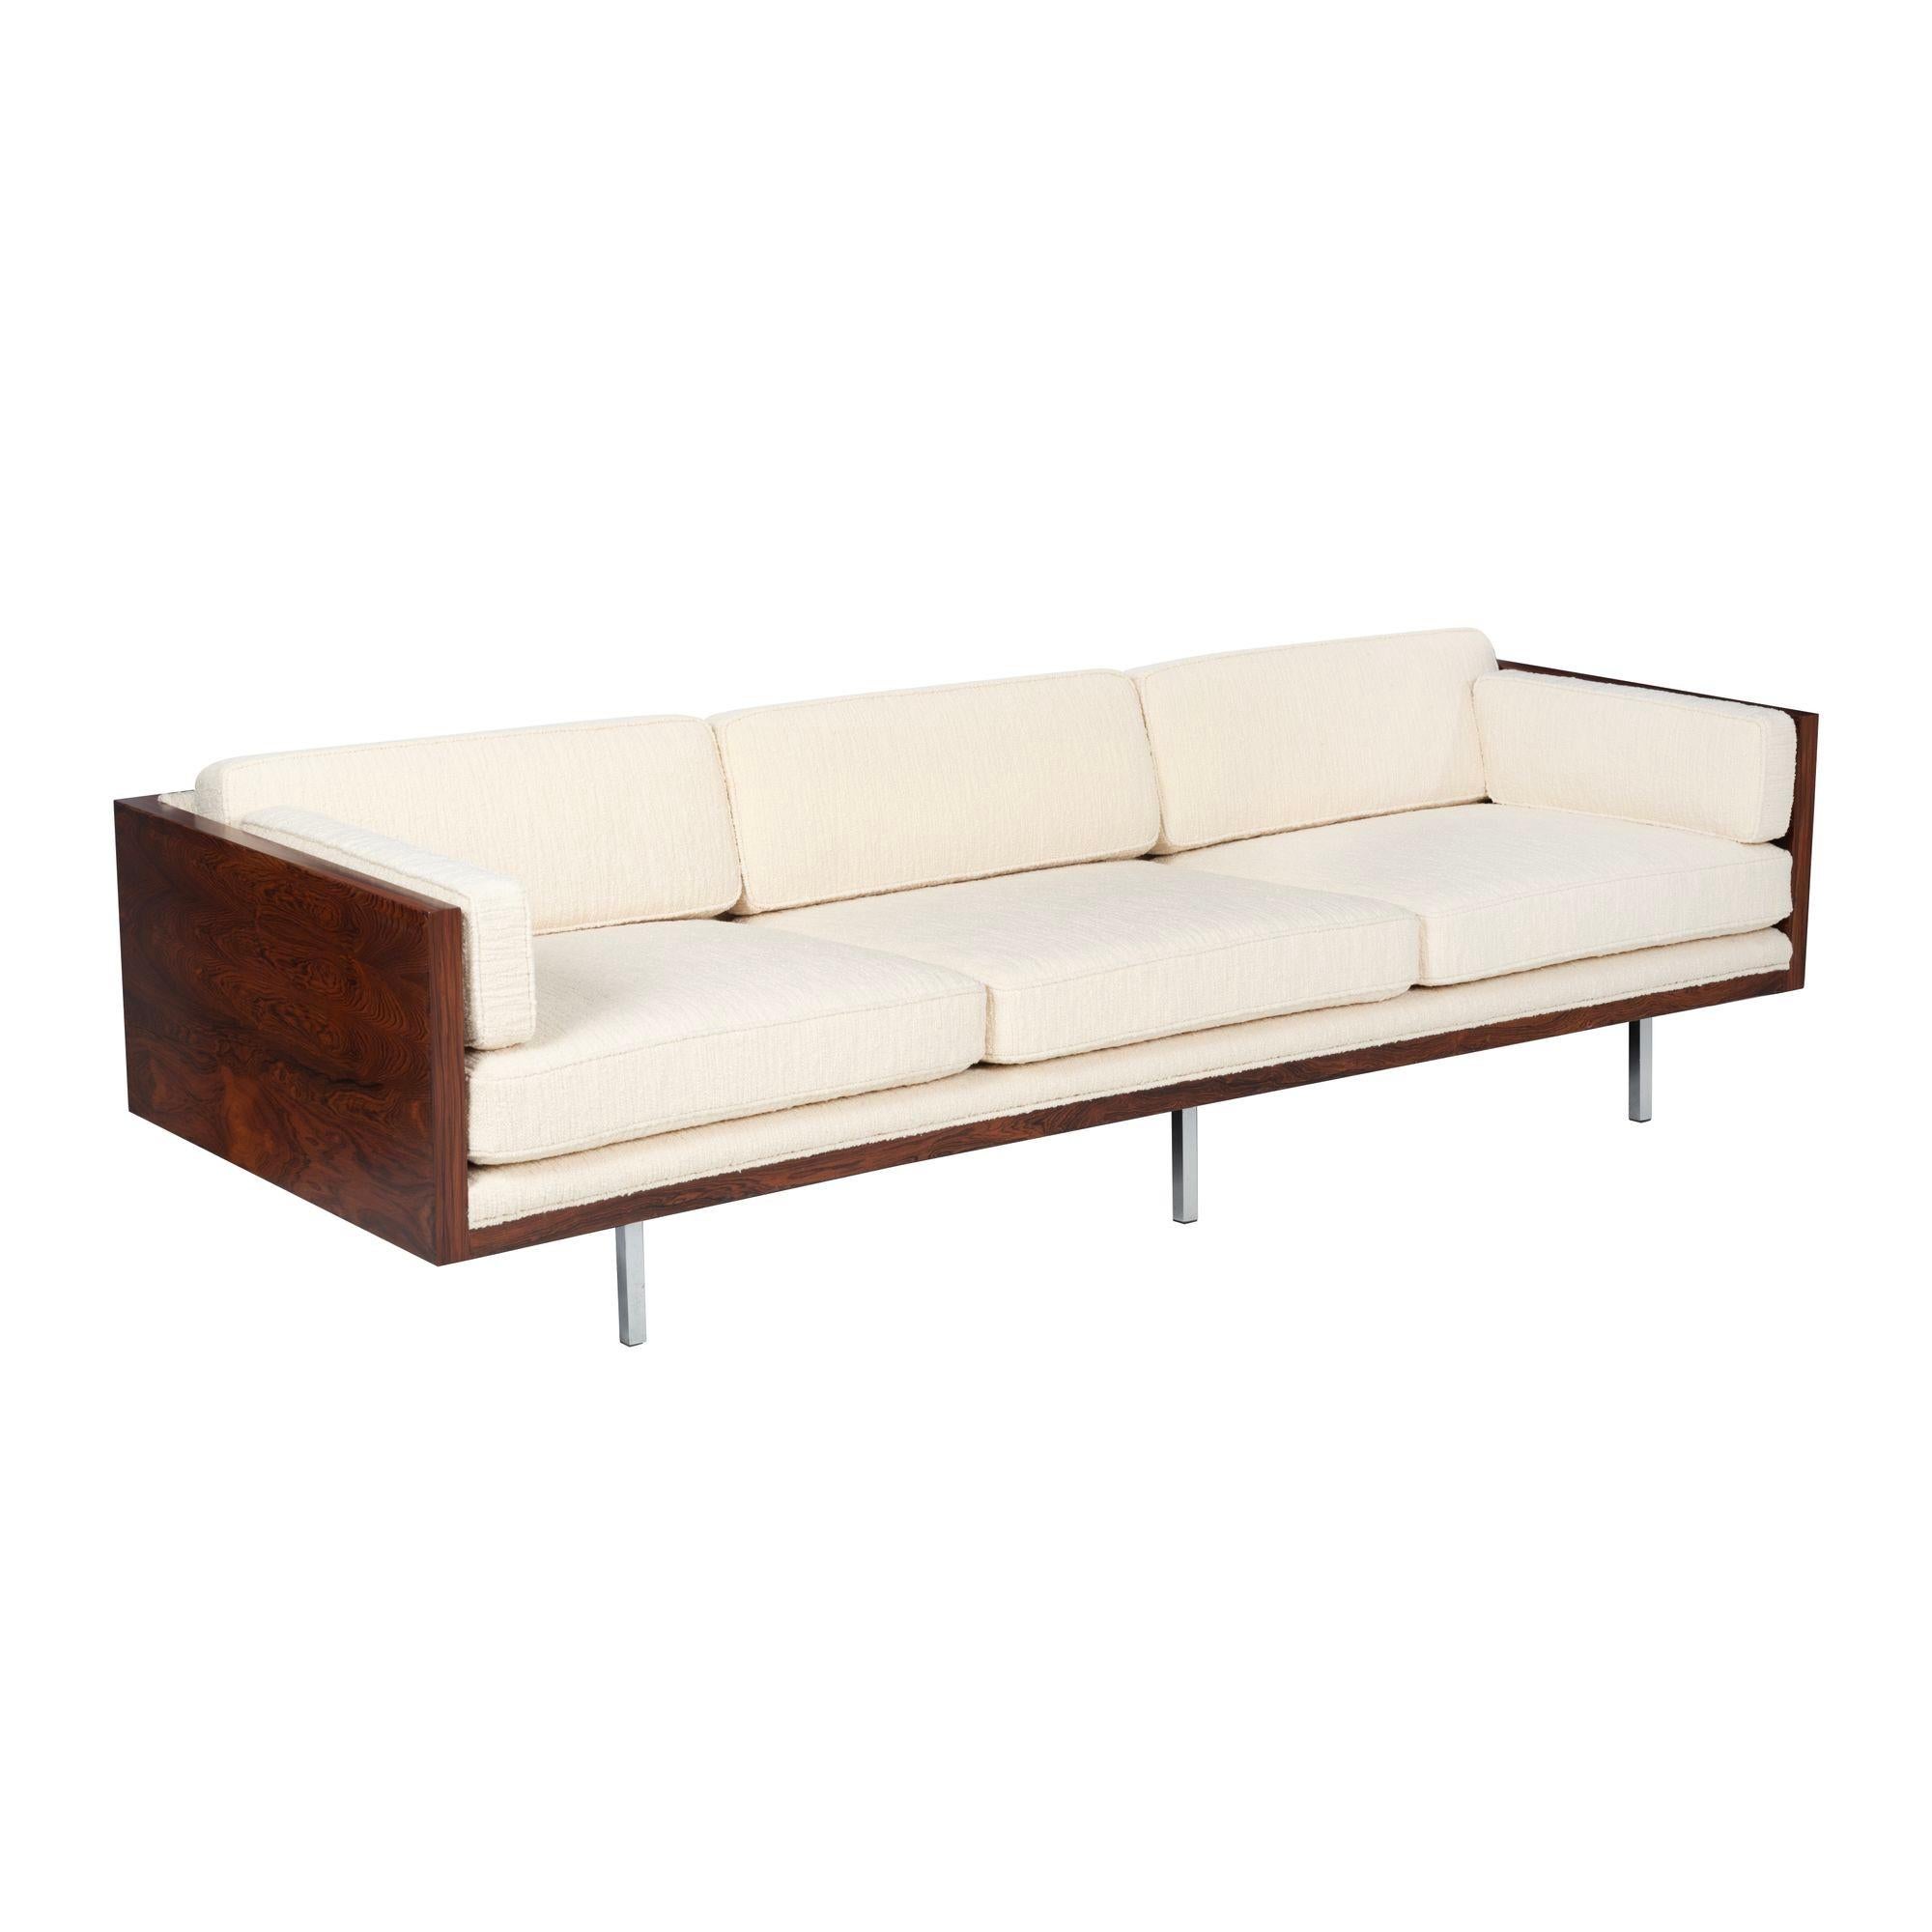 Milo Baughman for Thayer Coggin Rosewood Case Sofa In Good Condition For Sale In Chicago, IL